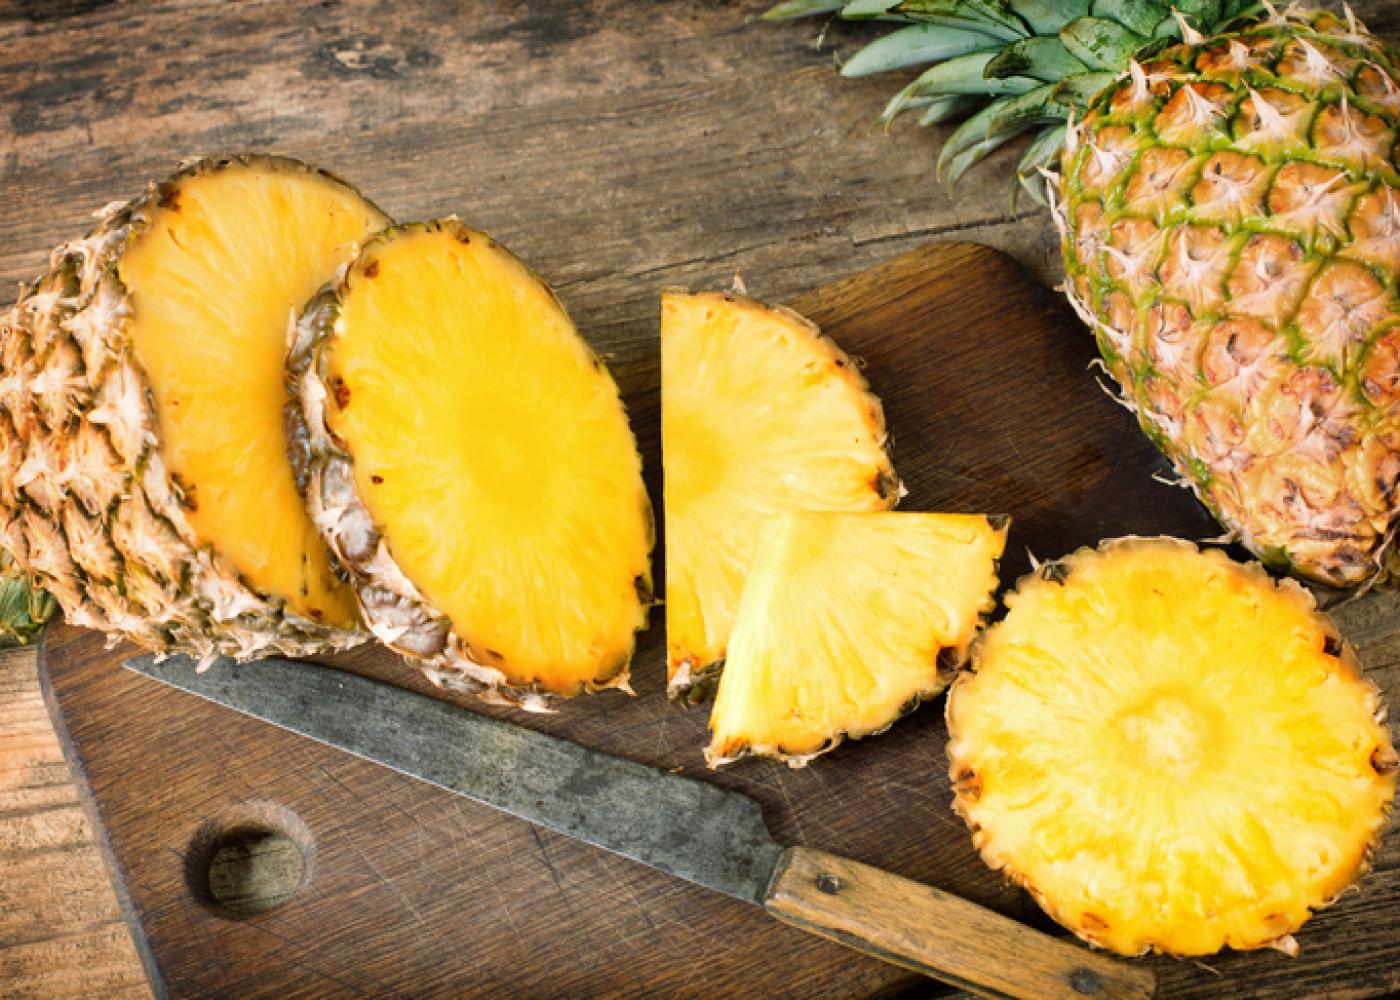 Does Your Real Age Match Your Taste Buds’ Age? Pick a Food for Each of These 16 Ingredients to Find Out Pineapple